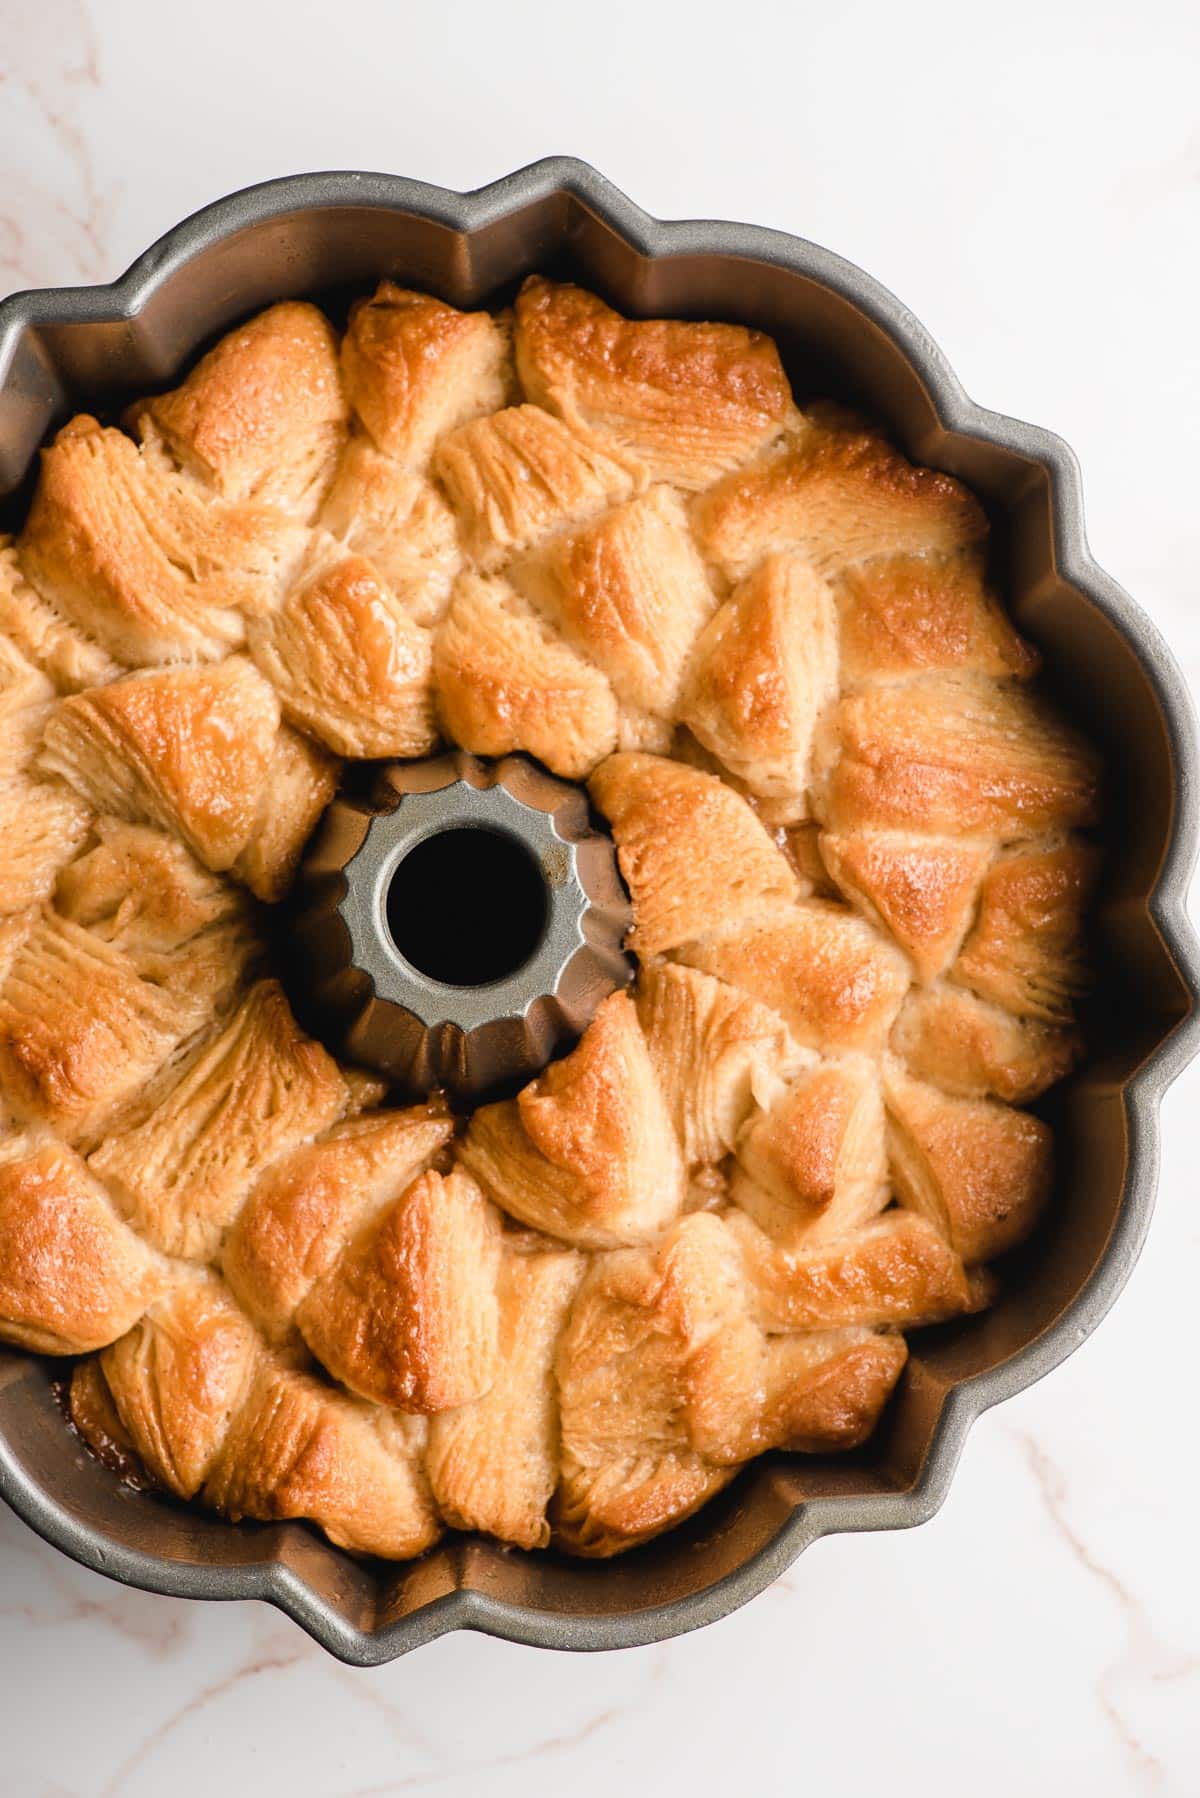 Caramel monkey bread shown in a bundt pan after being baked.